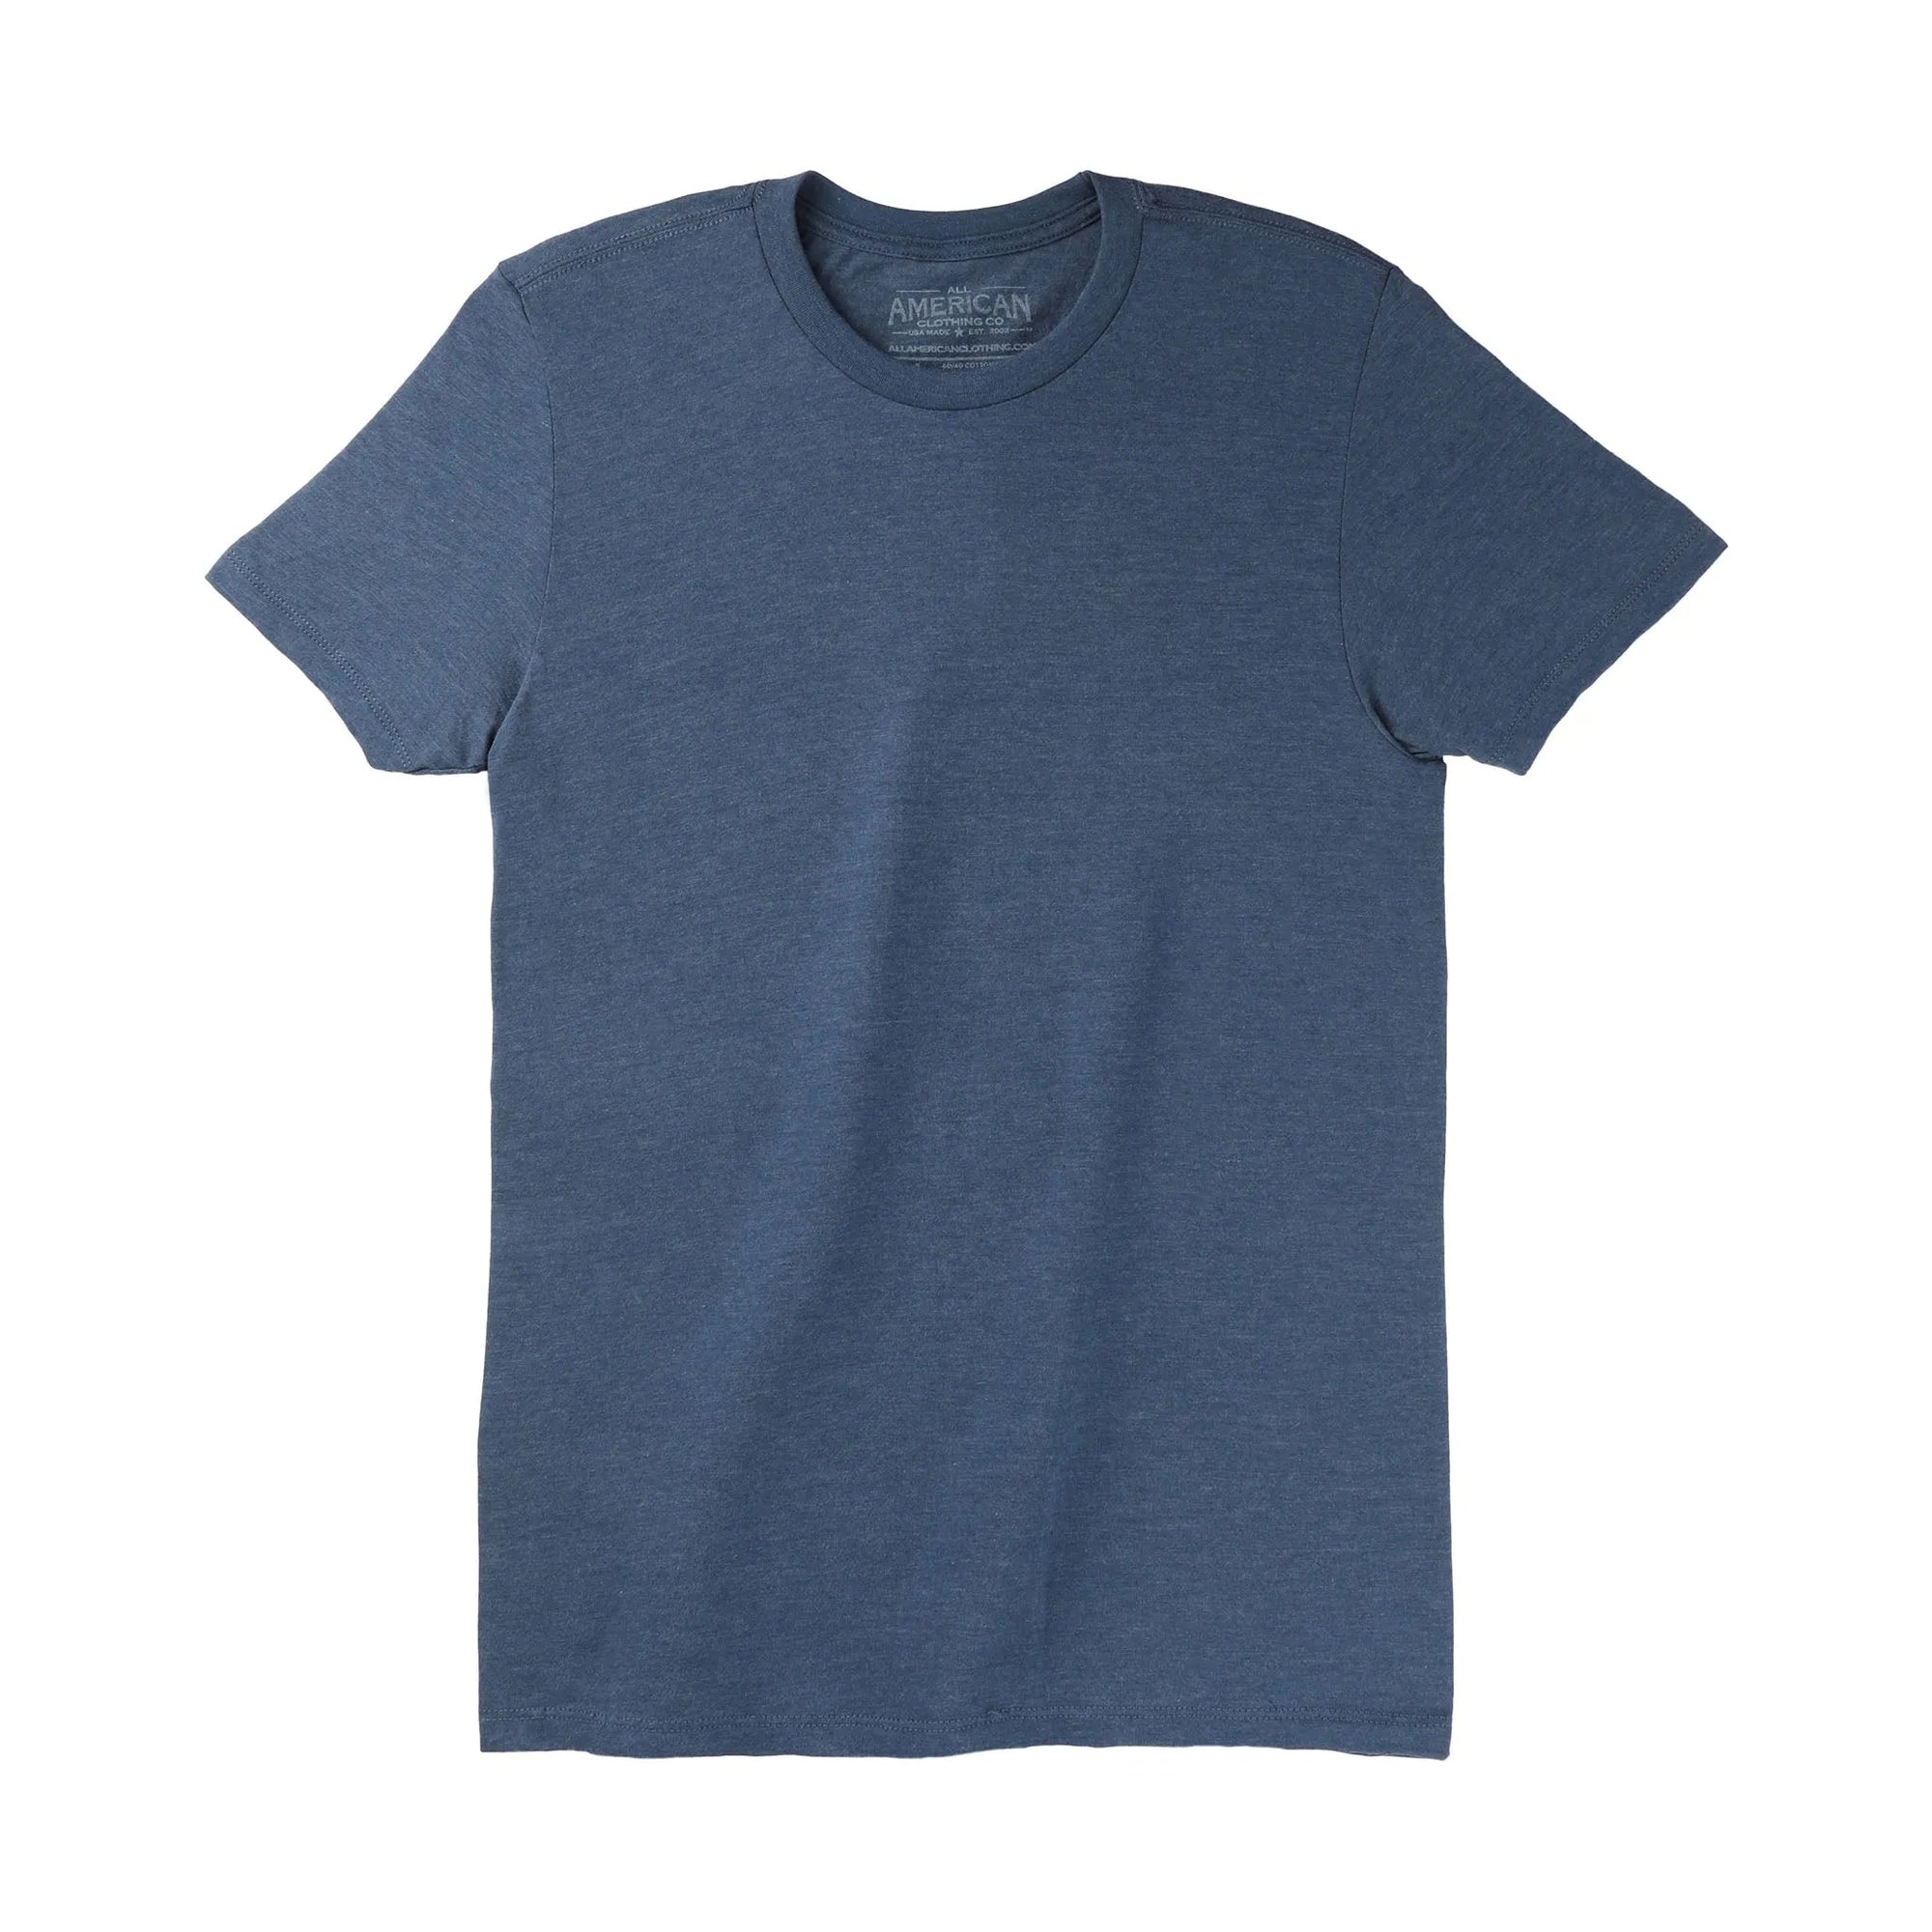 Classic Cotton Blend Crew Neck T-Shirt - All American Clothing Co